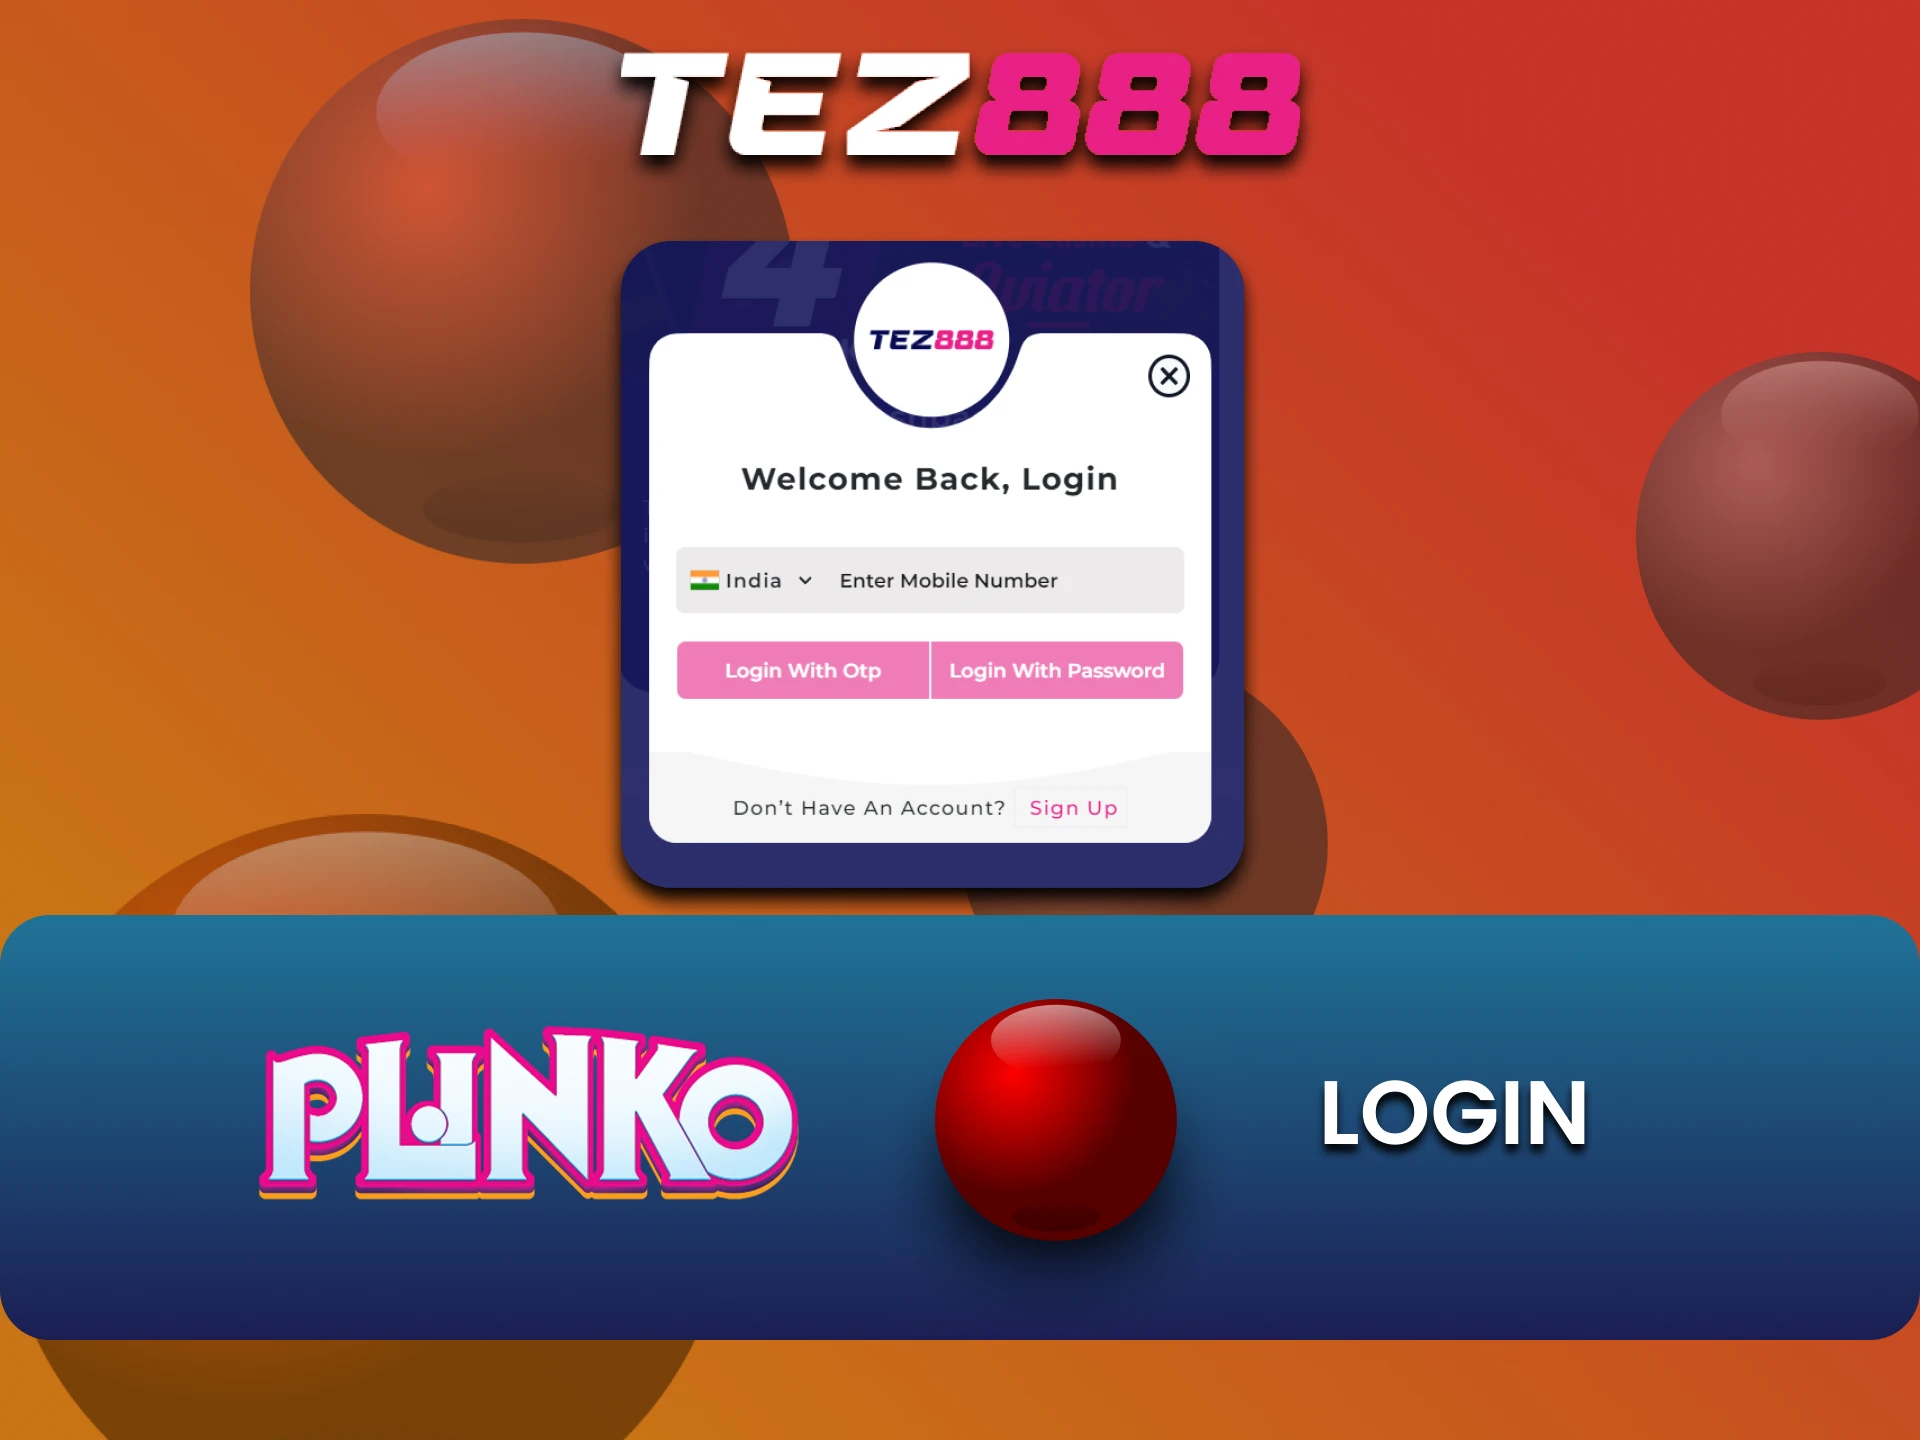 Log in to your existing Tez888 account to play Plinko.